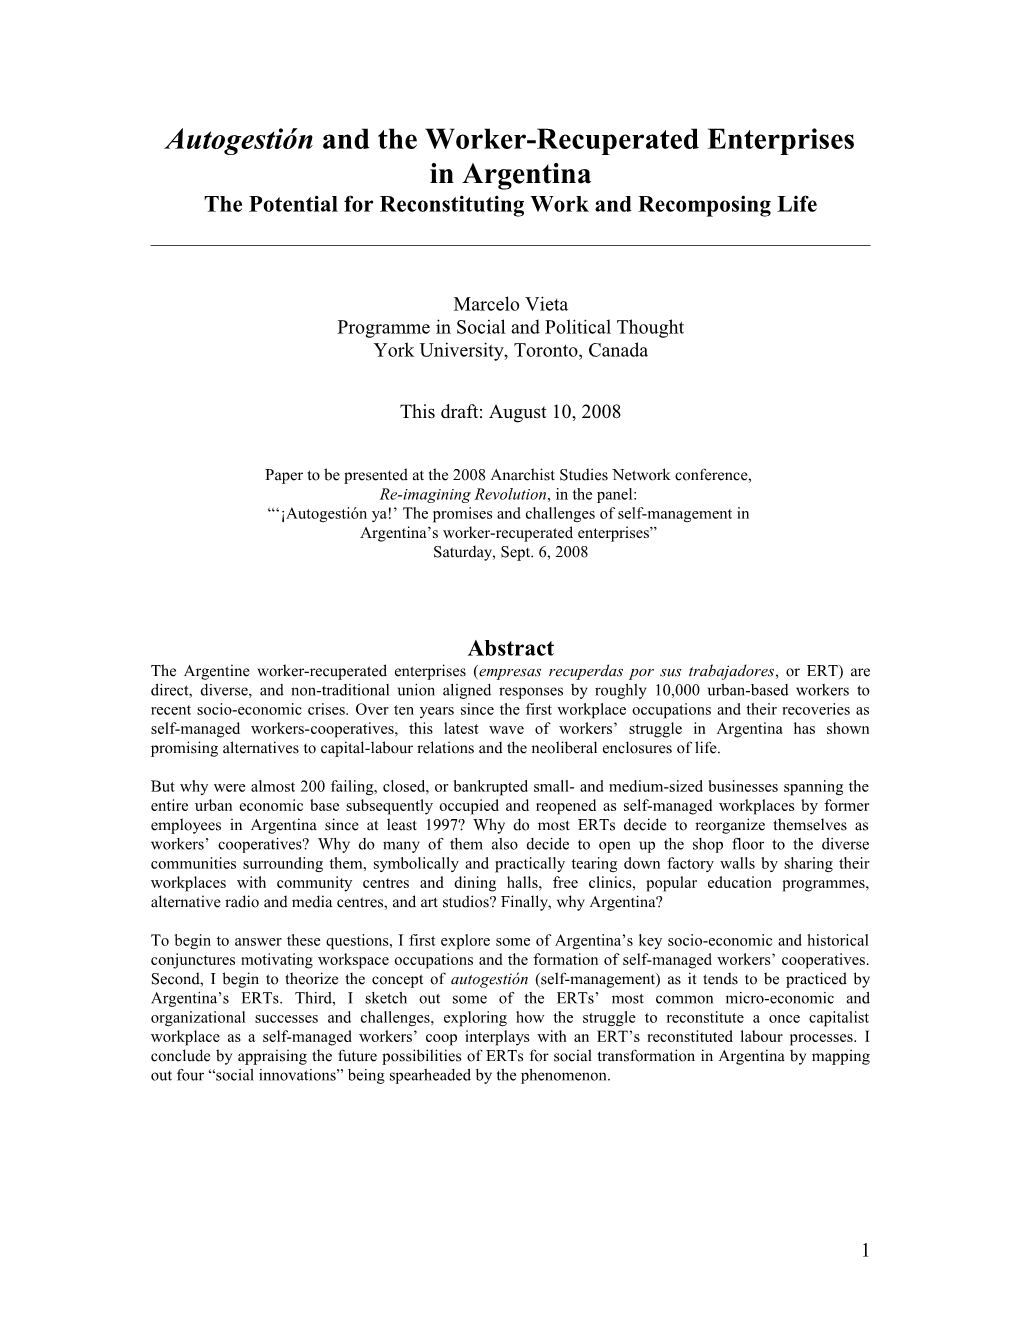 Autogestión in Argentina's Worker-Recuperated Enterprises: the Possibilities and Challenges